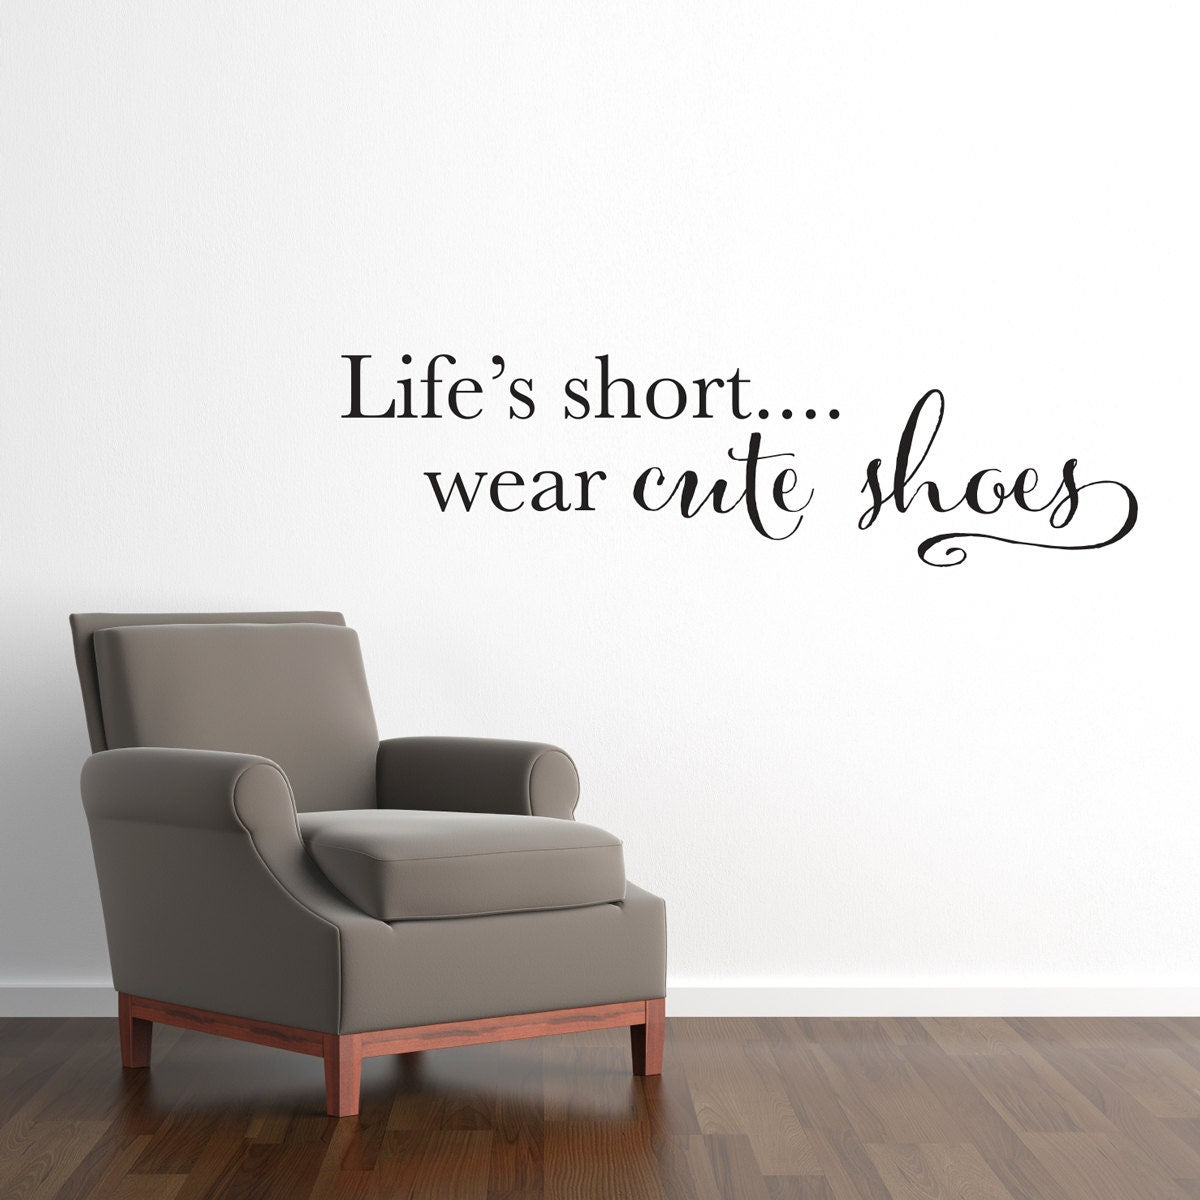 Life's Short Wall Decal - Life's short wear cute shoes decal - Wall Quote - Walk-in closet